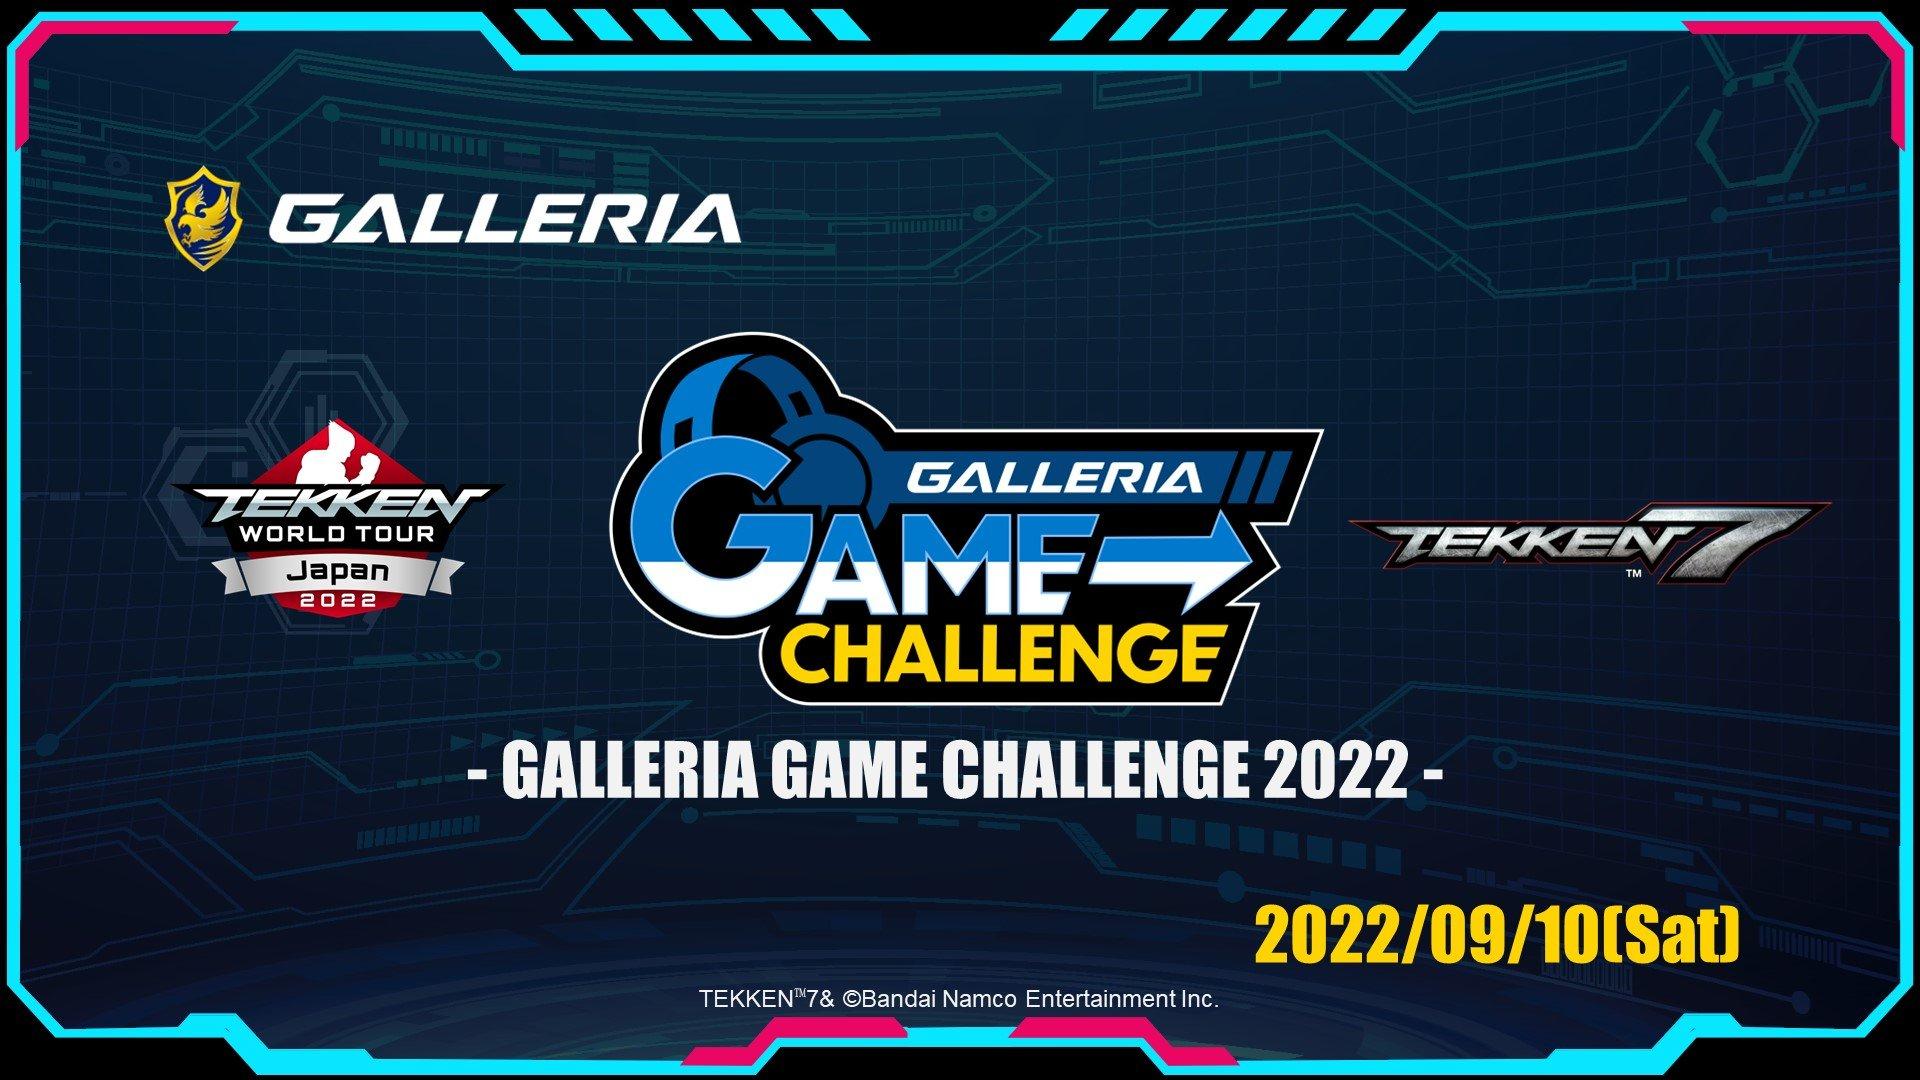 GALLERIA GAME CHALLENGE 2022 feature image